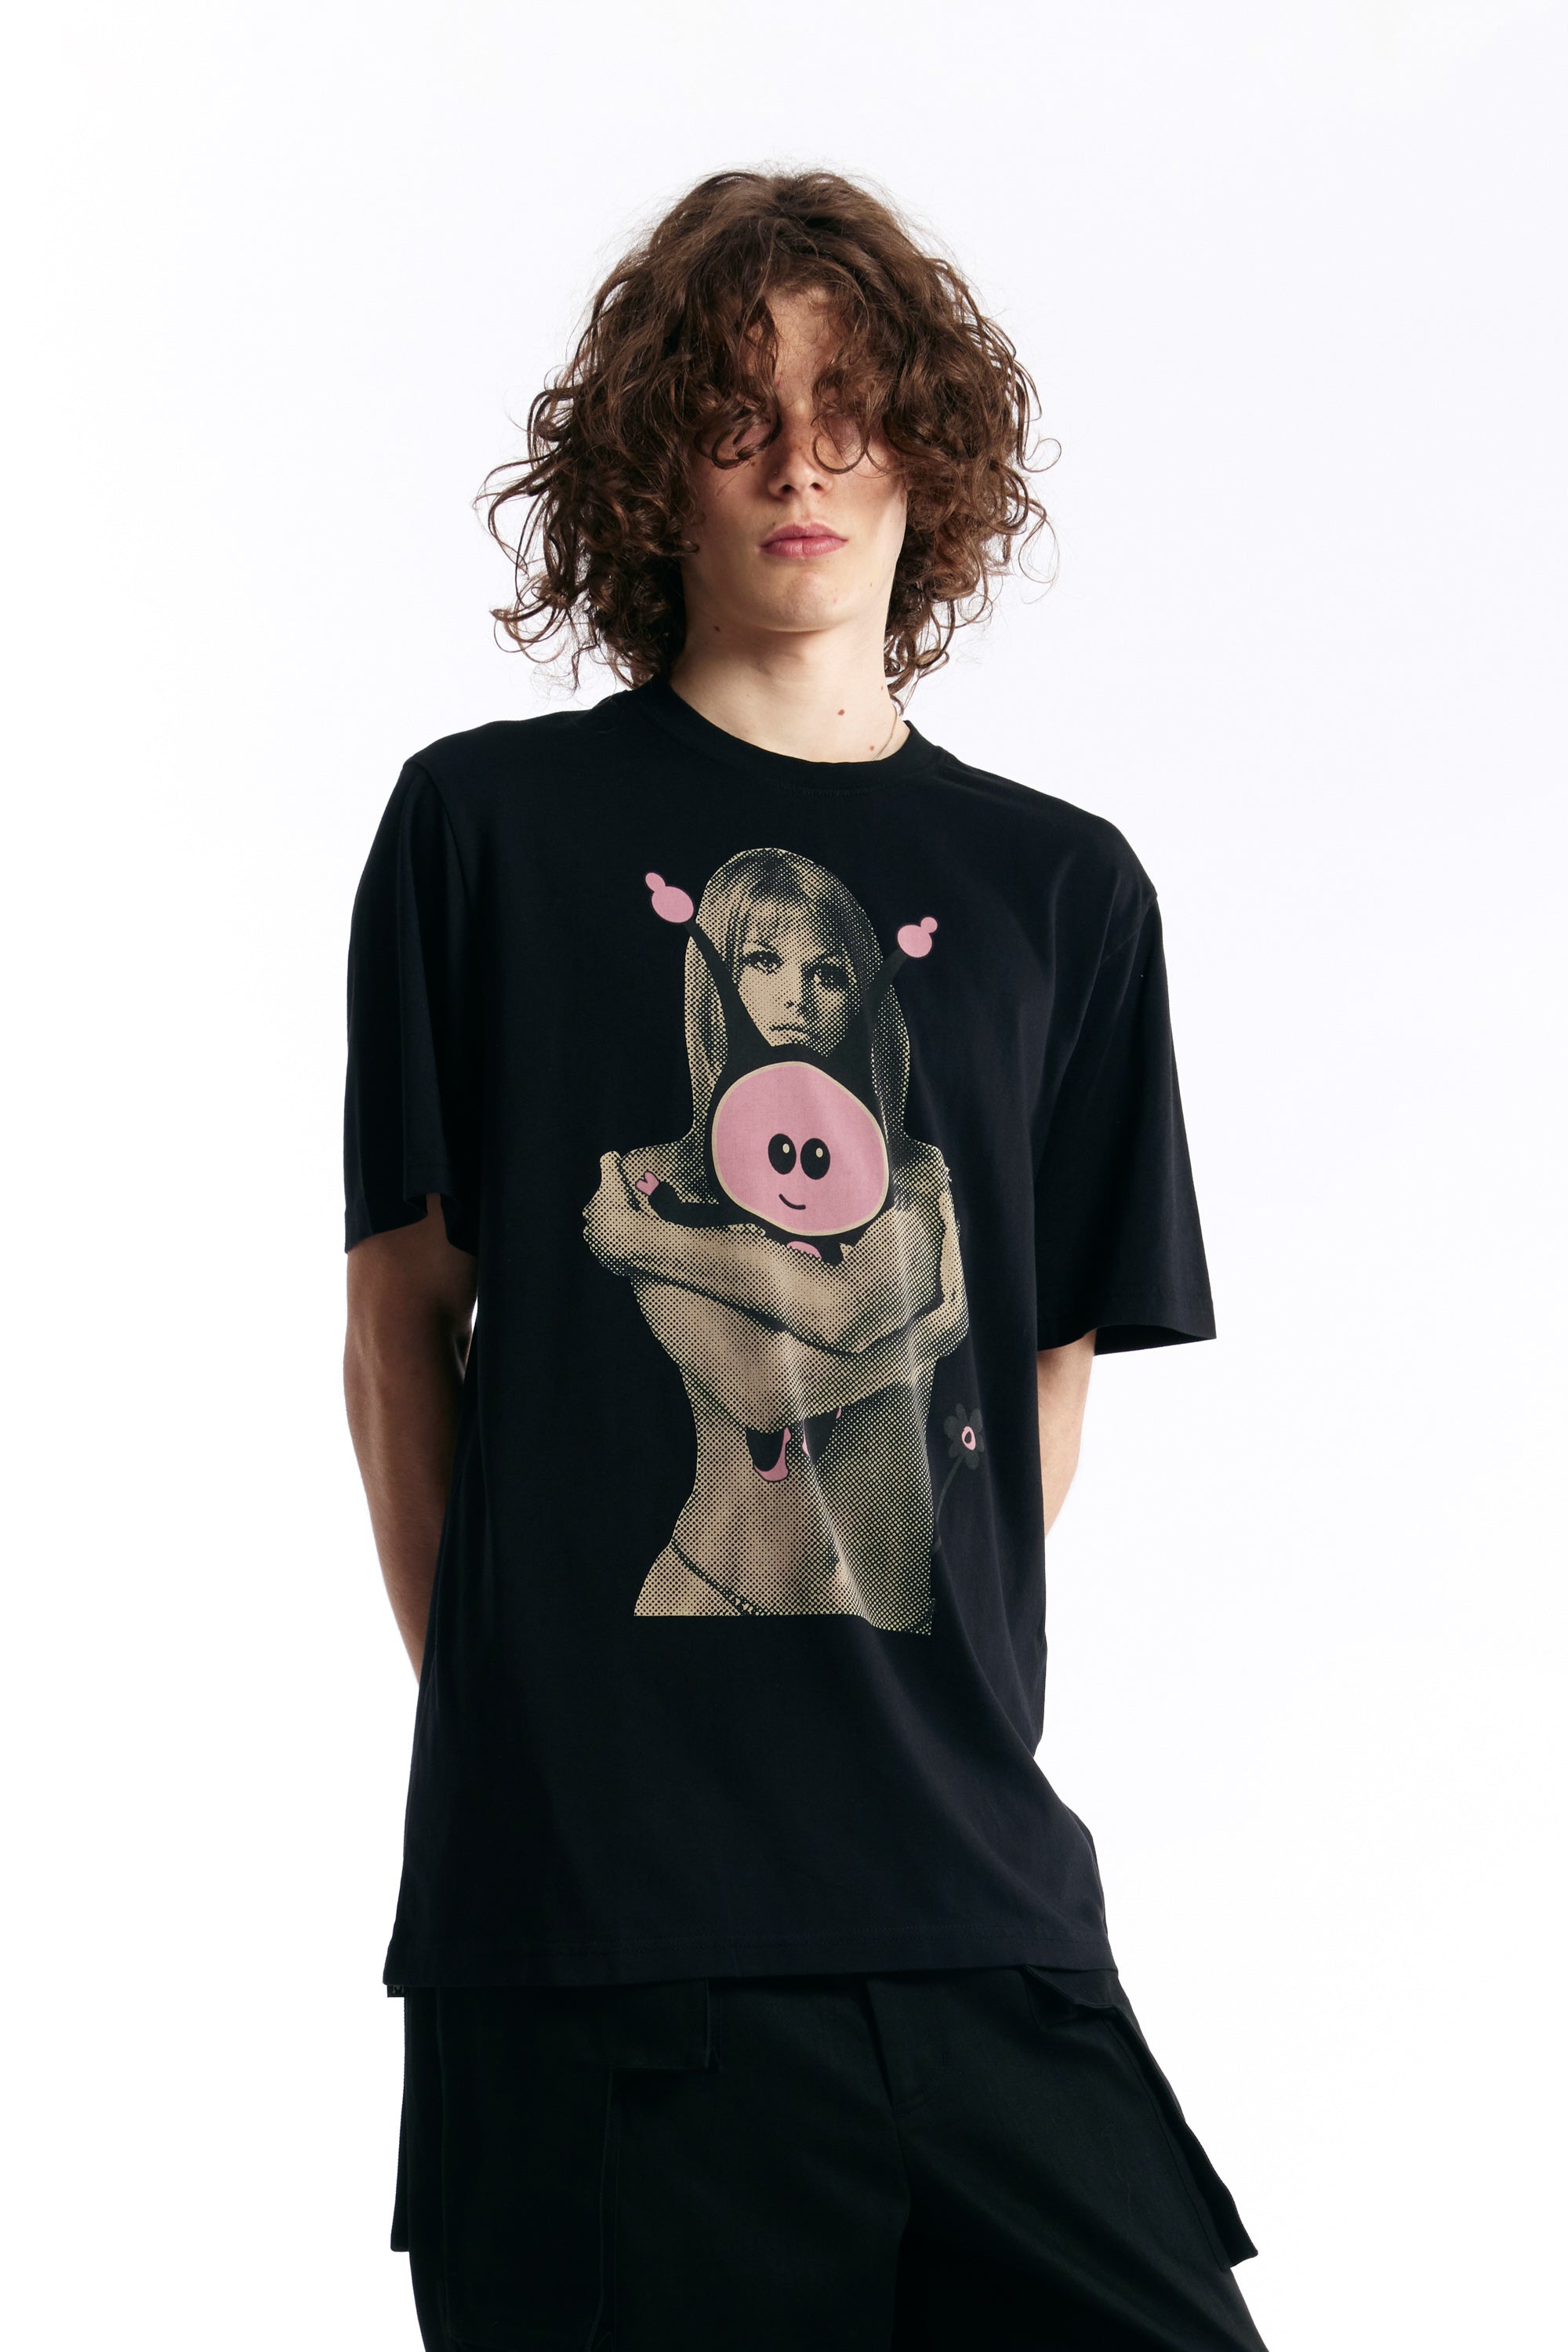 The PAM X HYSTERIC GLAMOUR - MARPI HUG SS TEE BLACK available online with global shipping, and in PAM Stores Melbourne and Sydney.